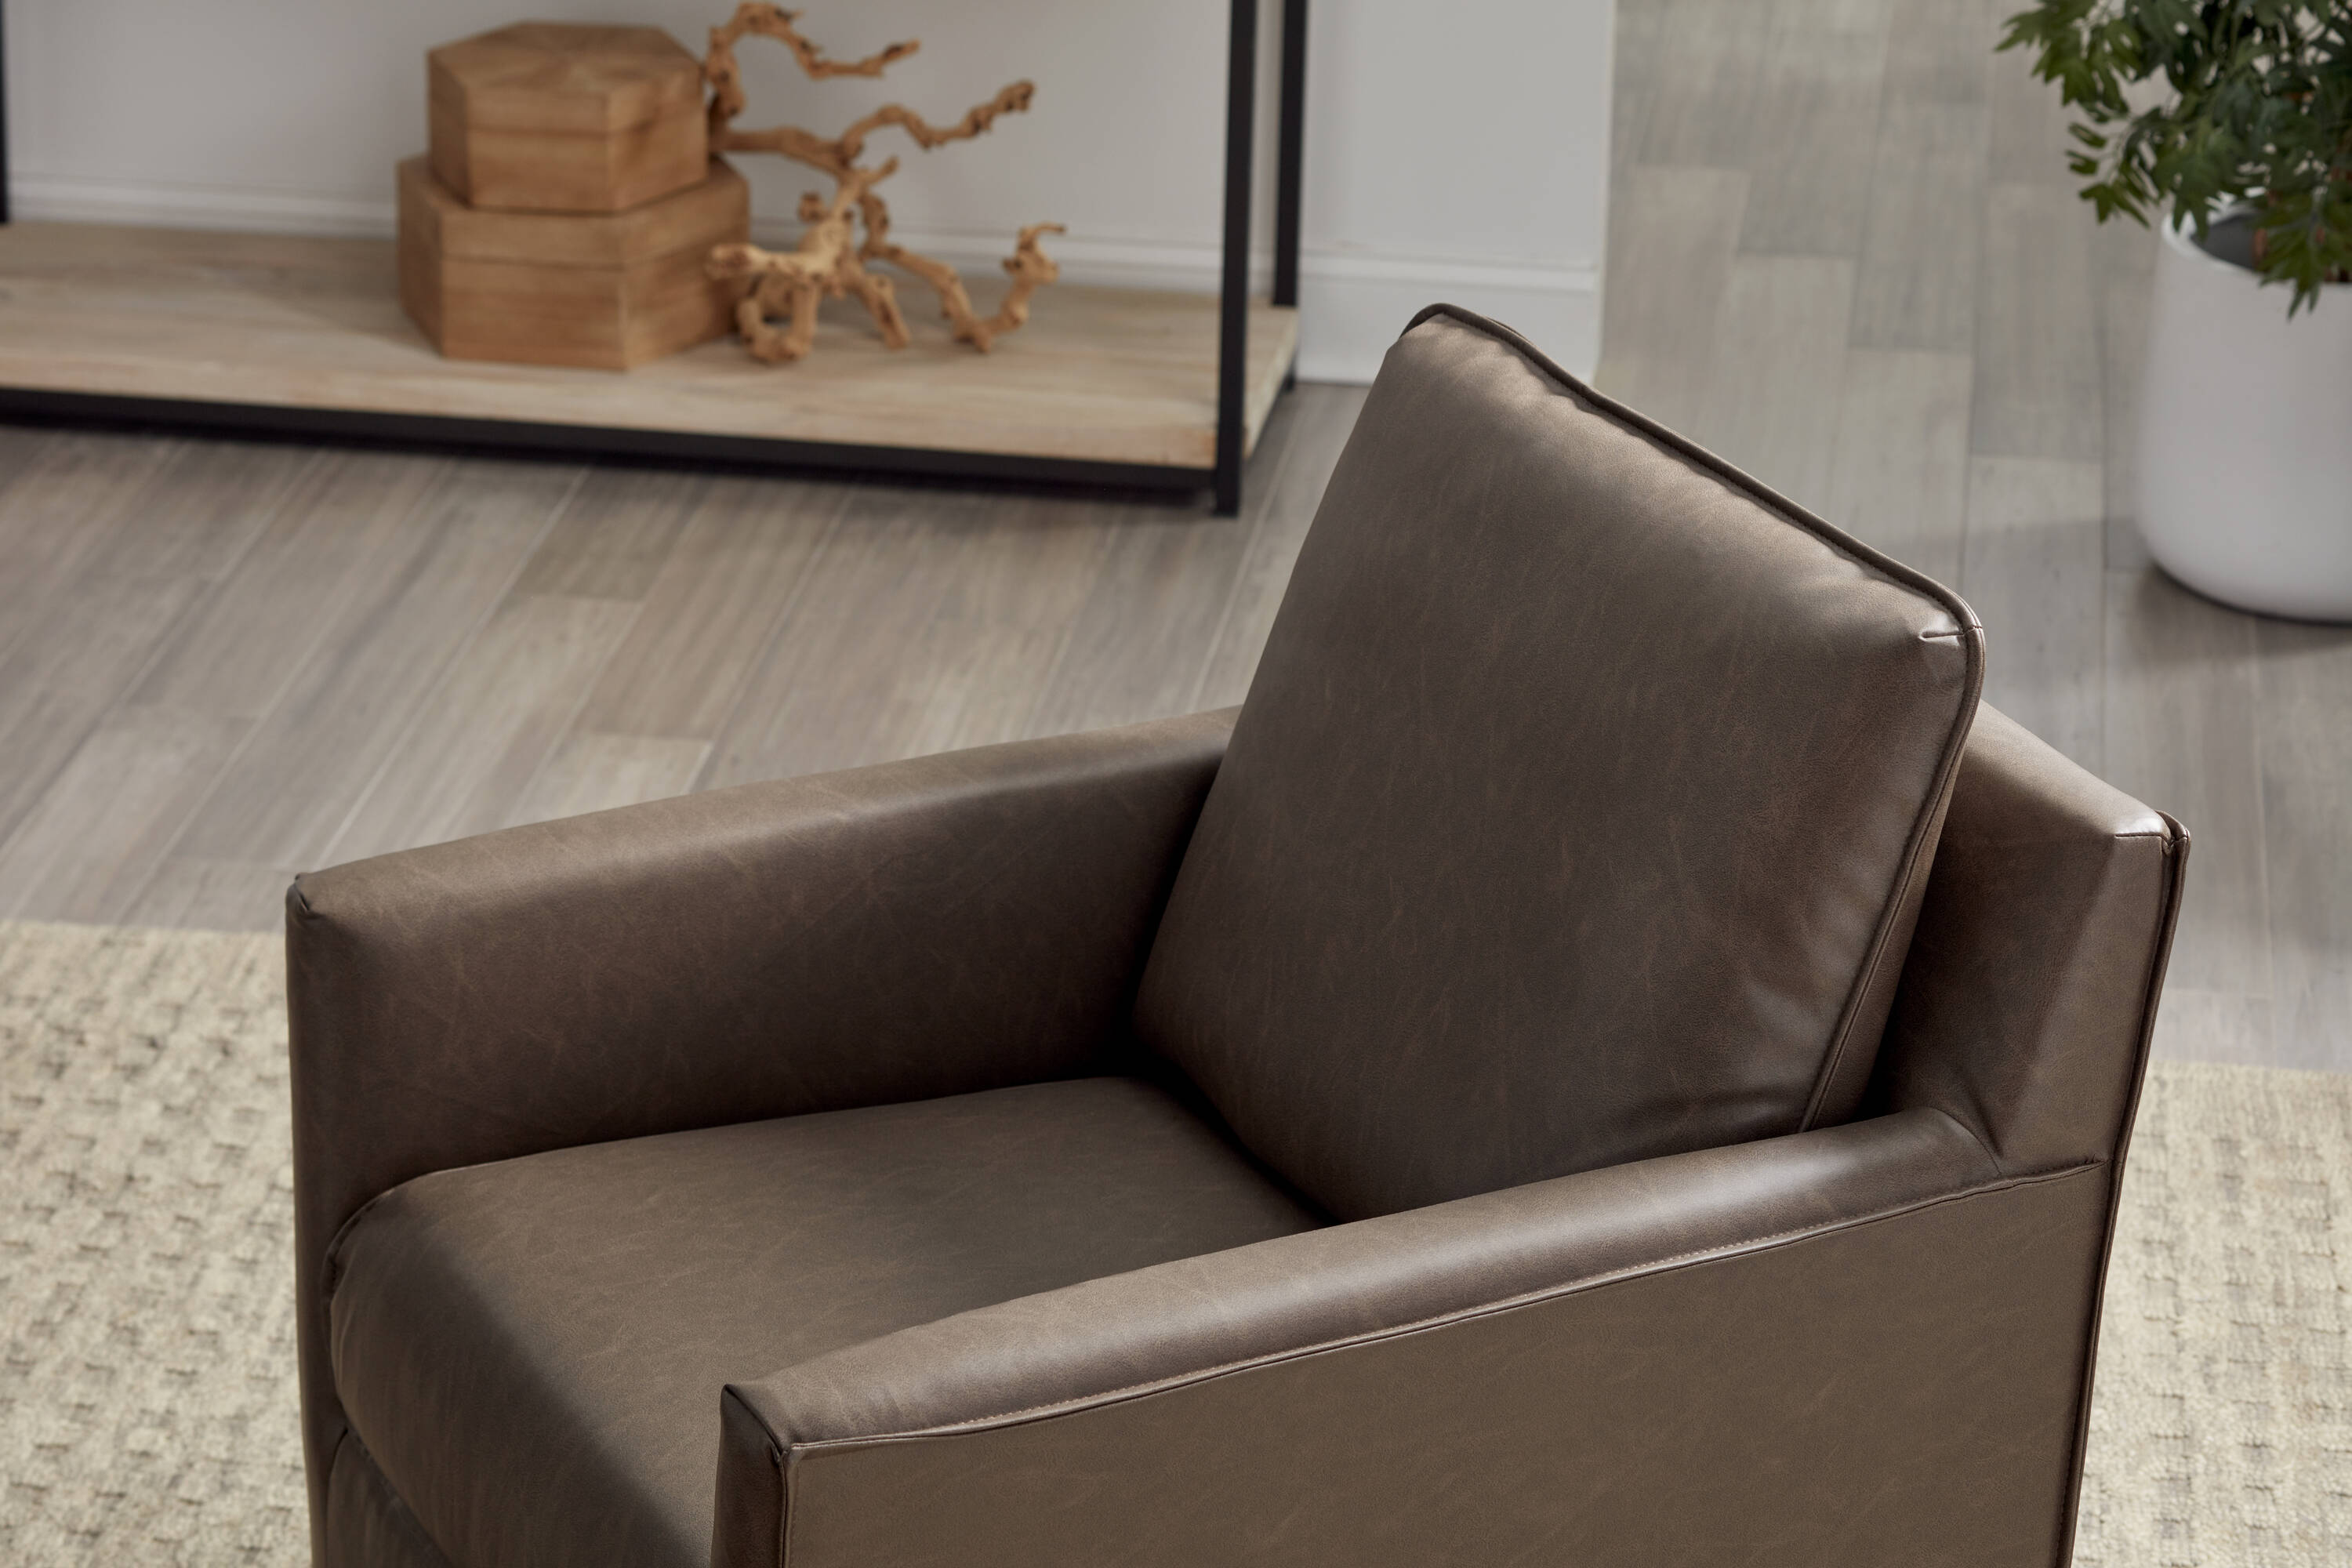 Chairs Swivel the at department Brown + in allen Accent roth Chair Modern Blanchett